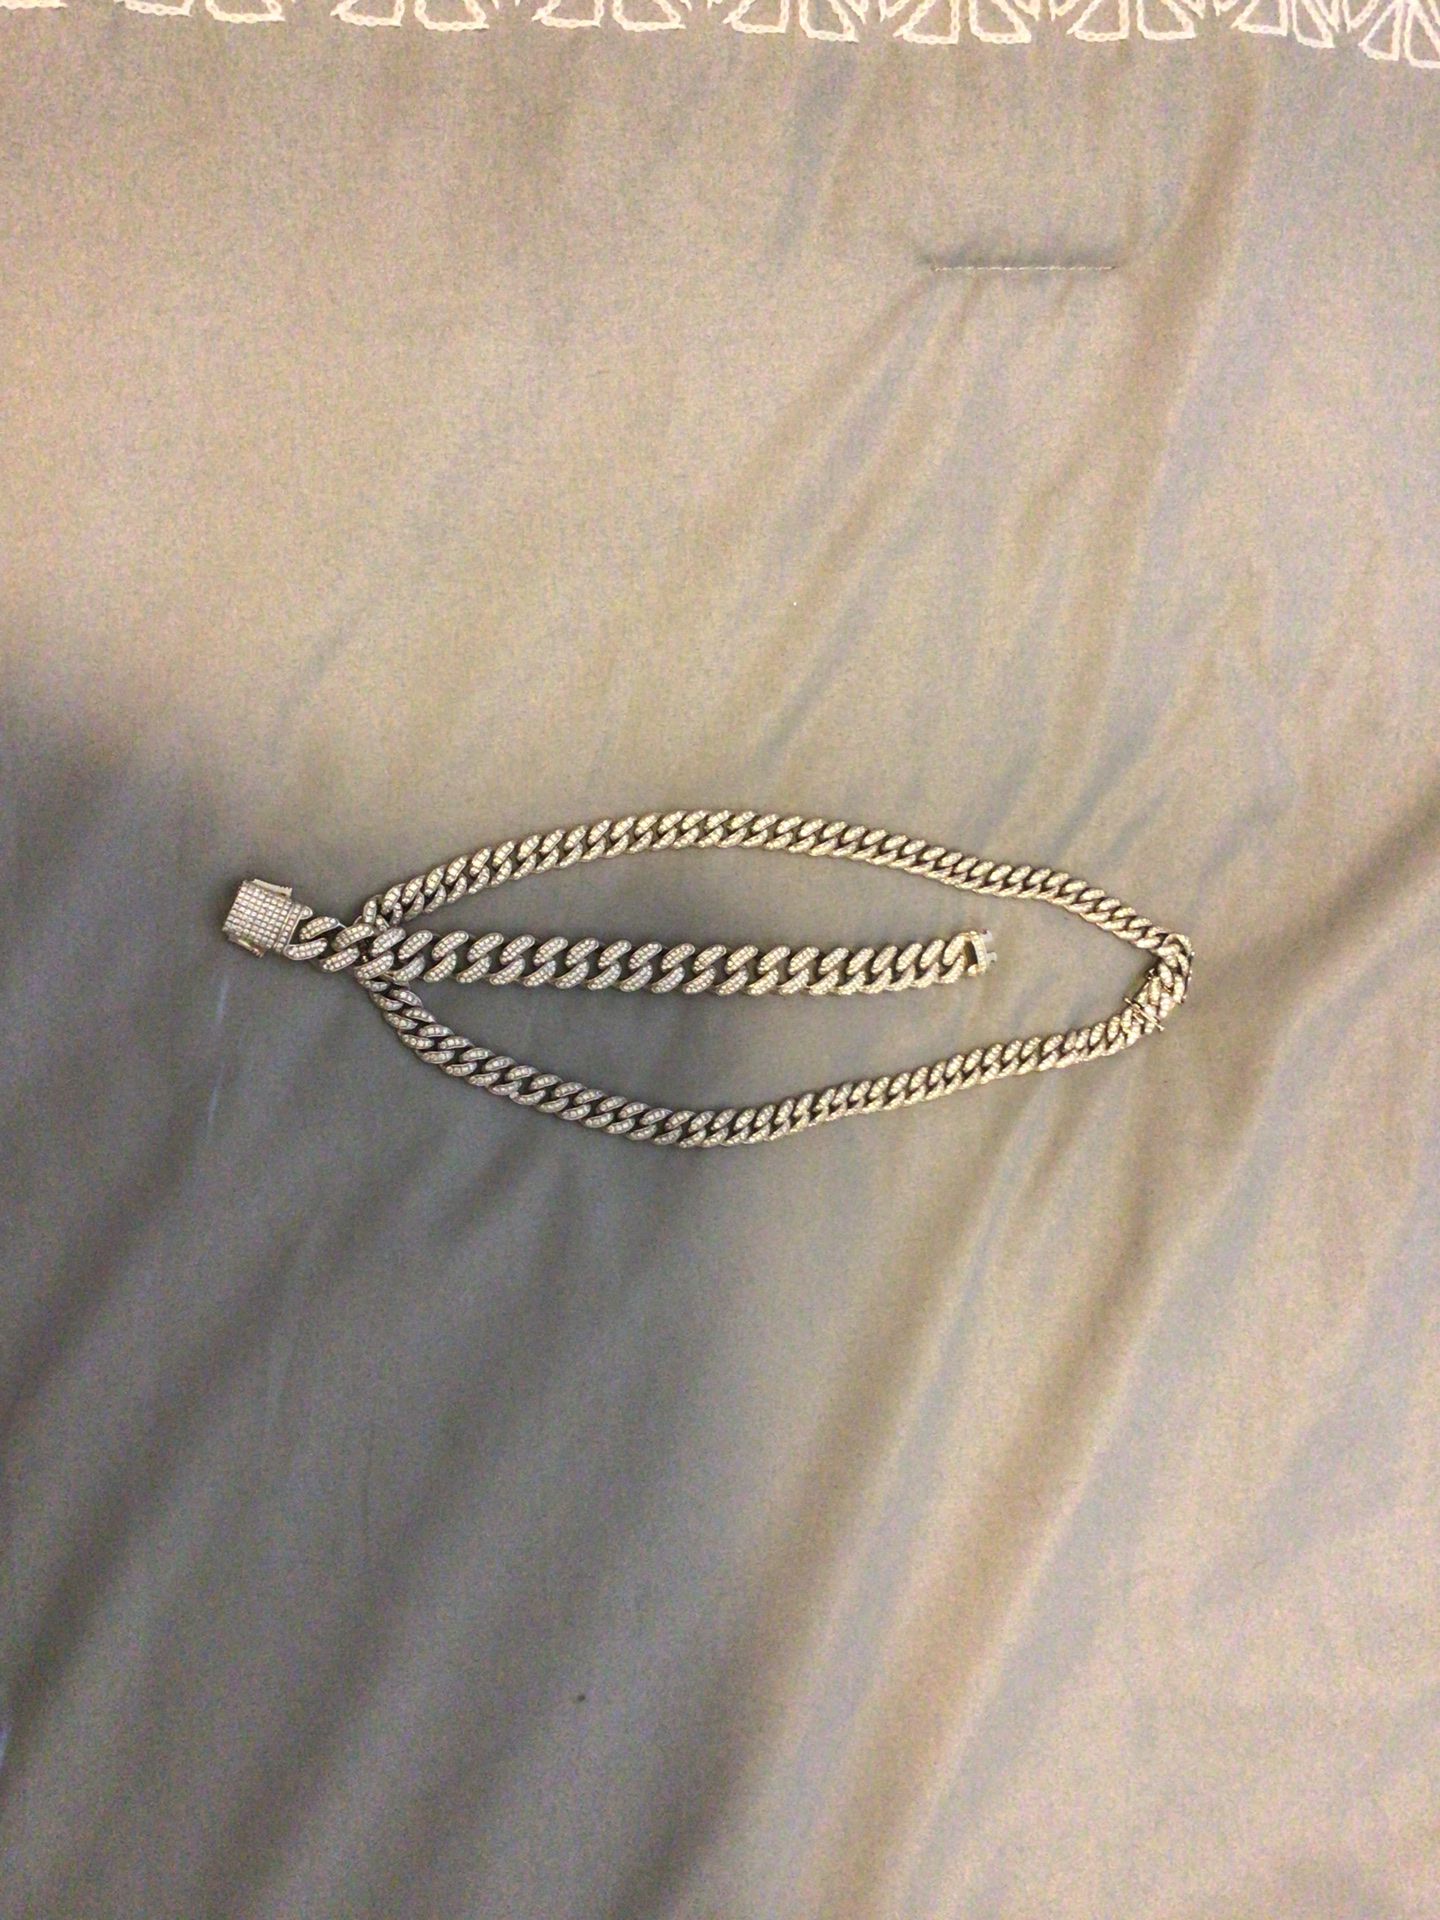 Brand New never used Cuban link Real Silver set for sale for 700